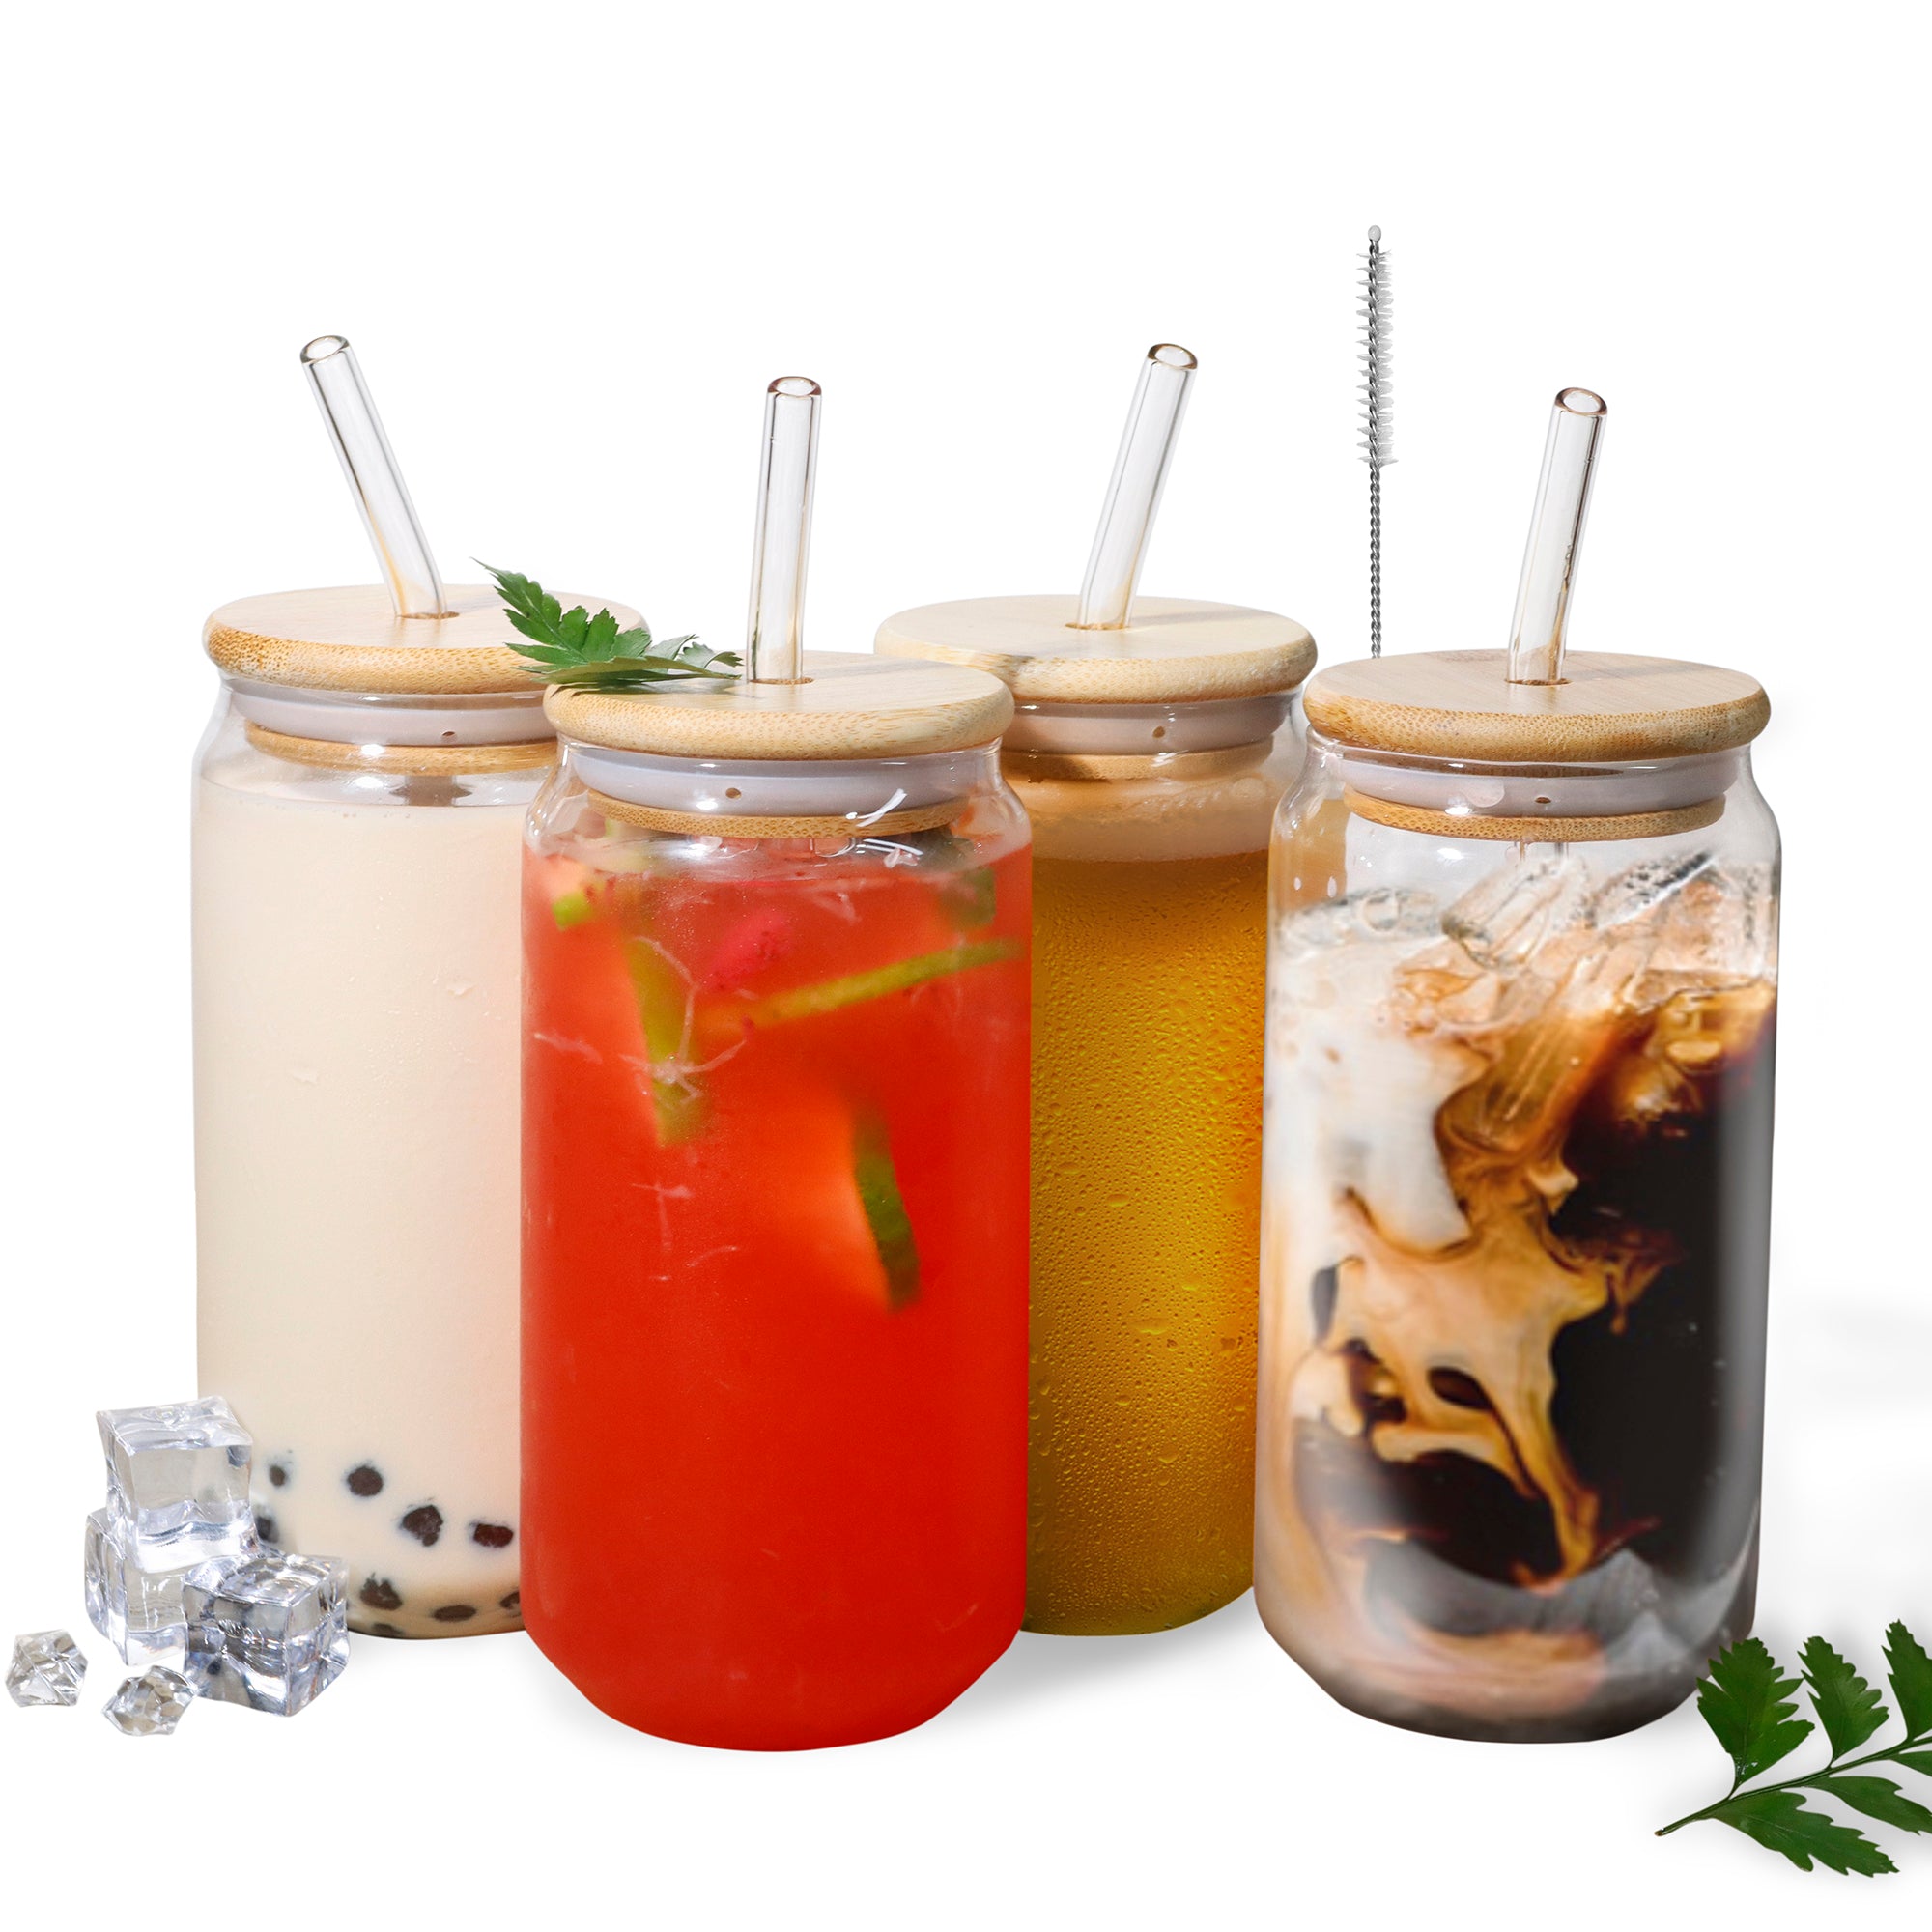 Can Shaped Glass with Reusable Bamboo Lid & Stainless Steel Drinking Straw  - 16 oz